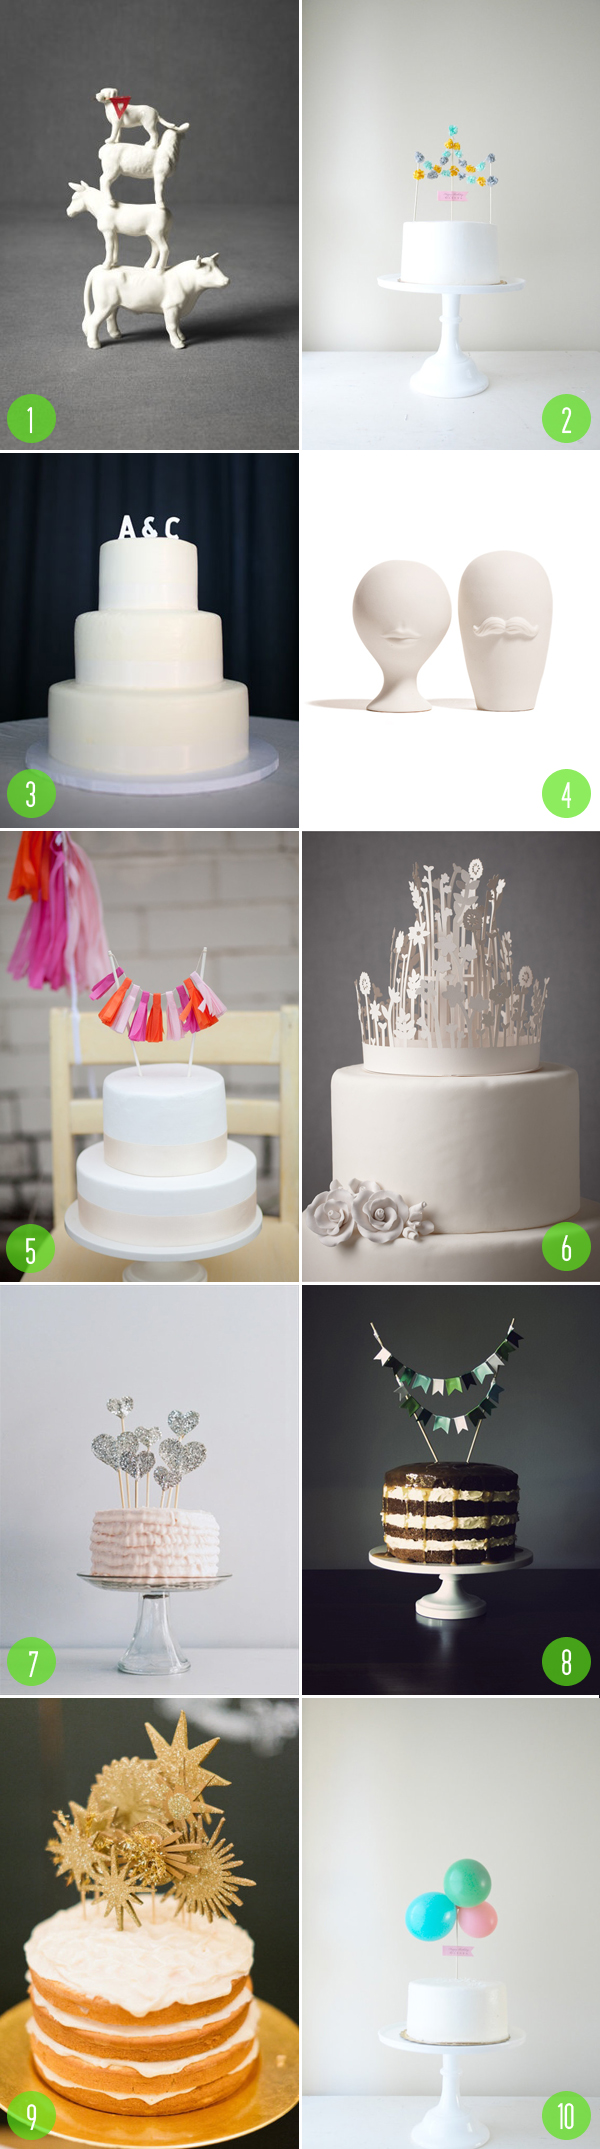 Top 10: Cake toppers | 2